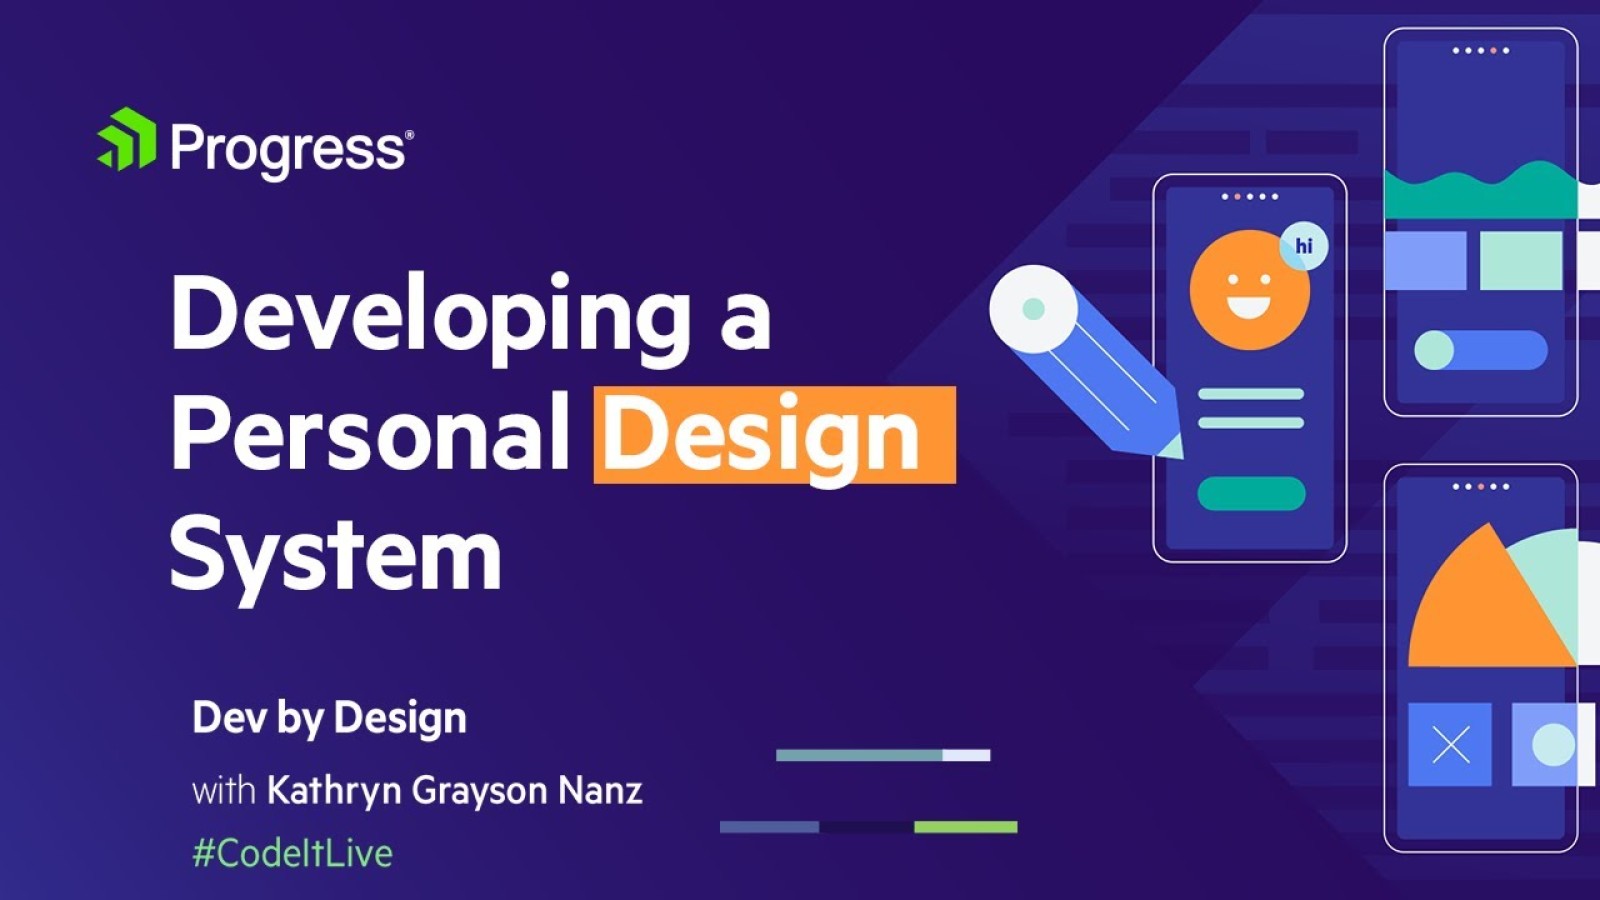 Dev By Design: How to build a Personal Design System